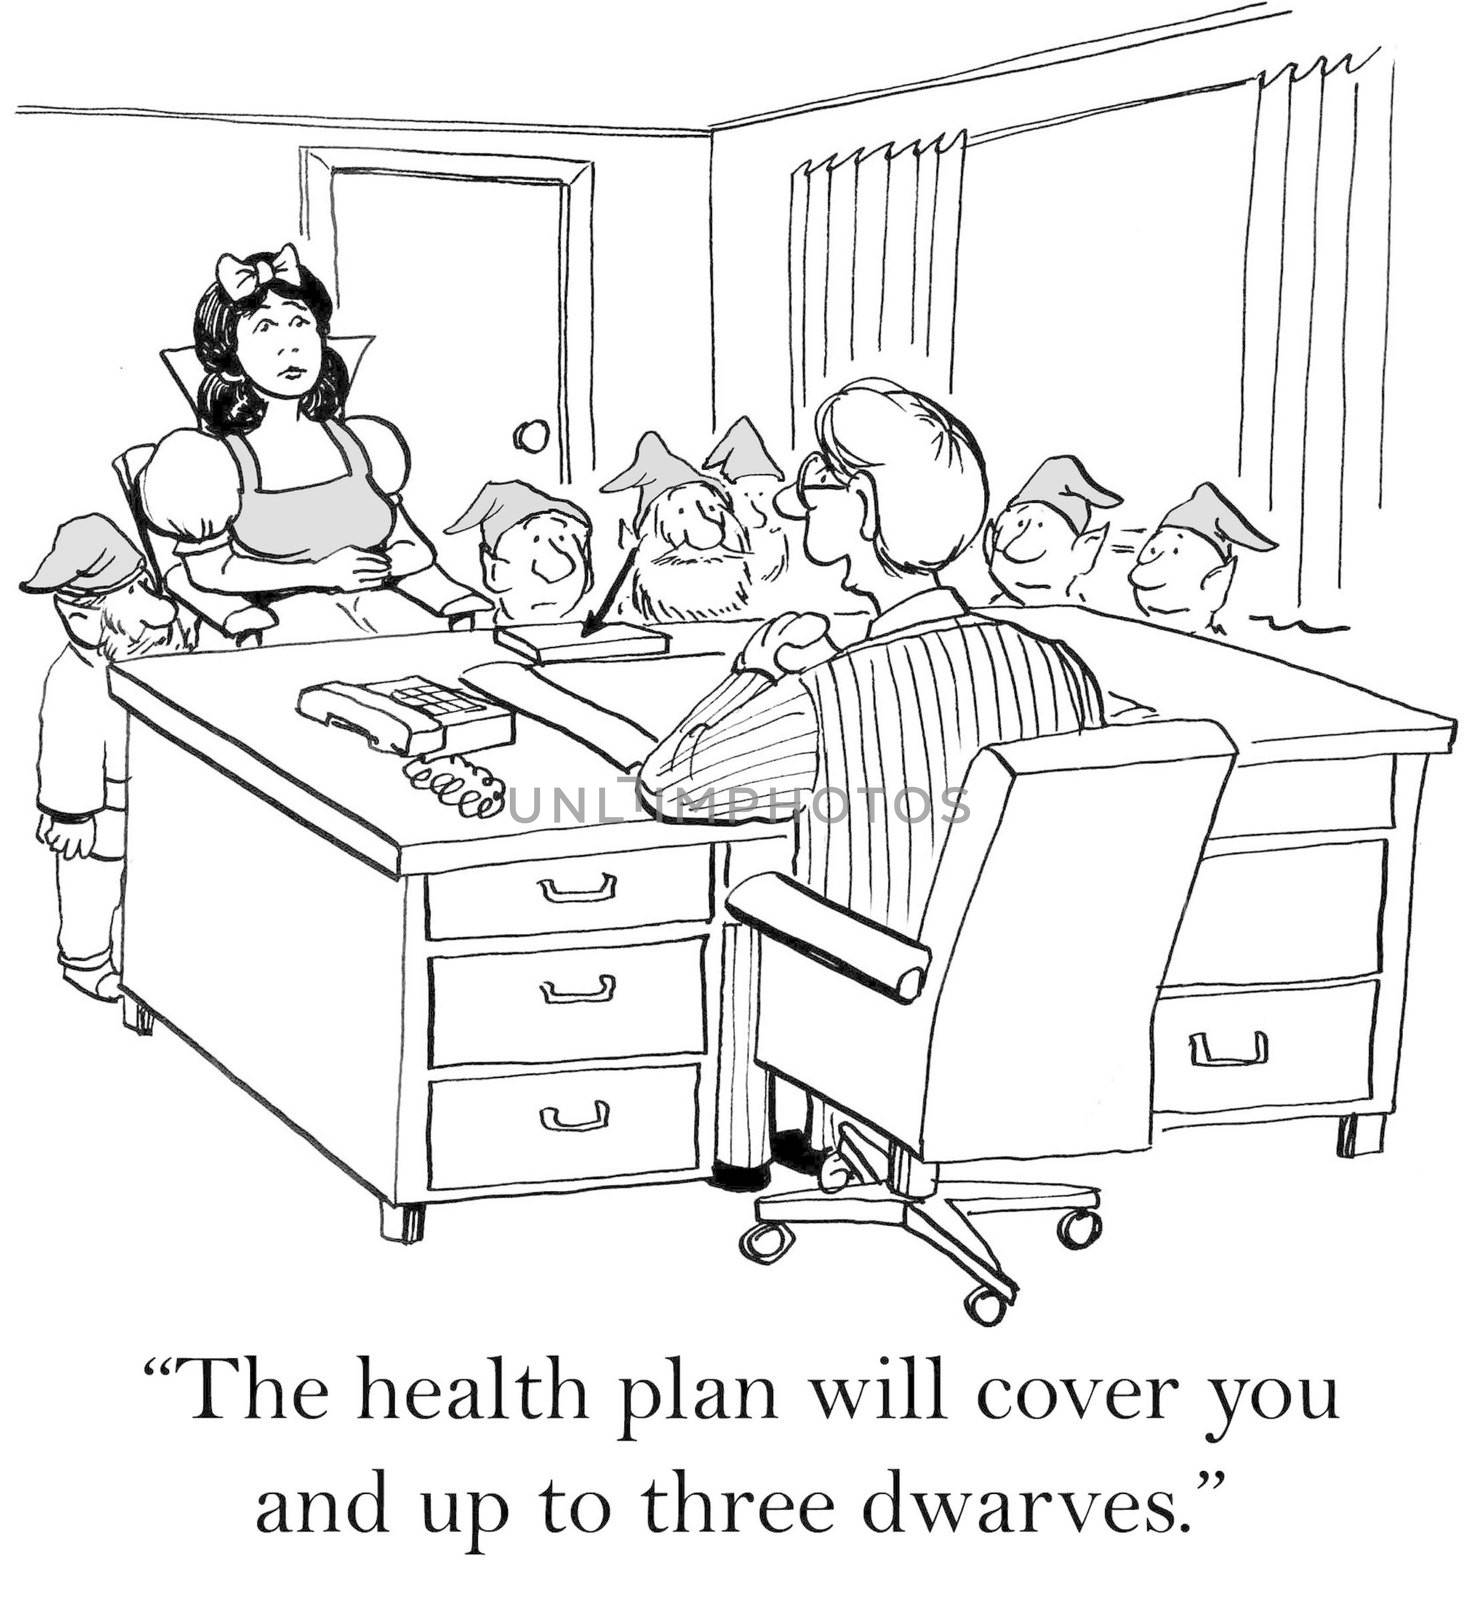 "The health plan will cover you and up to three dwarves."